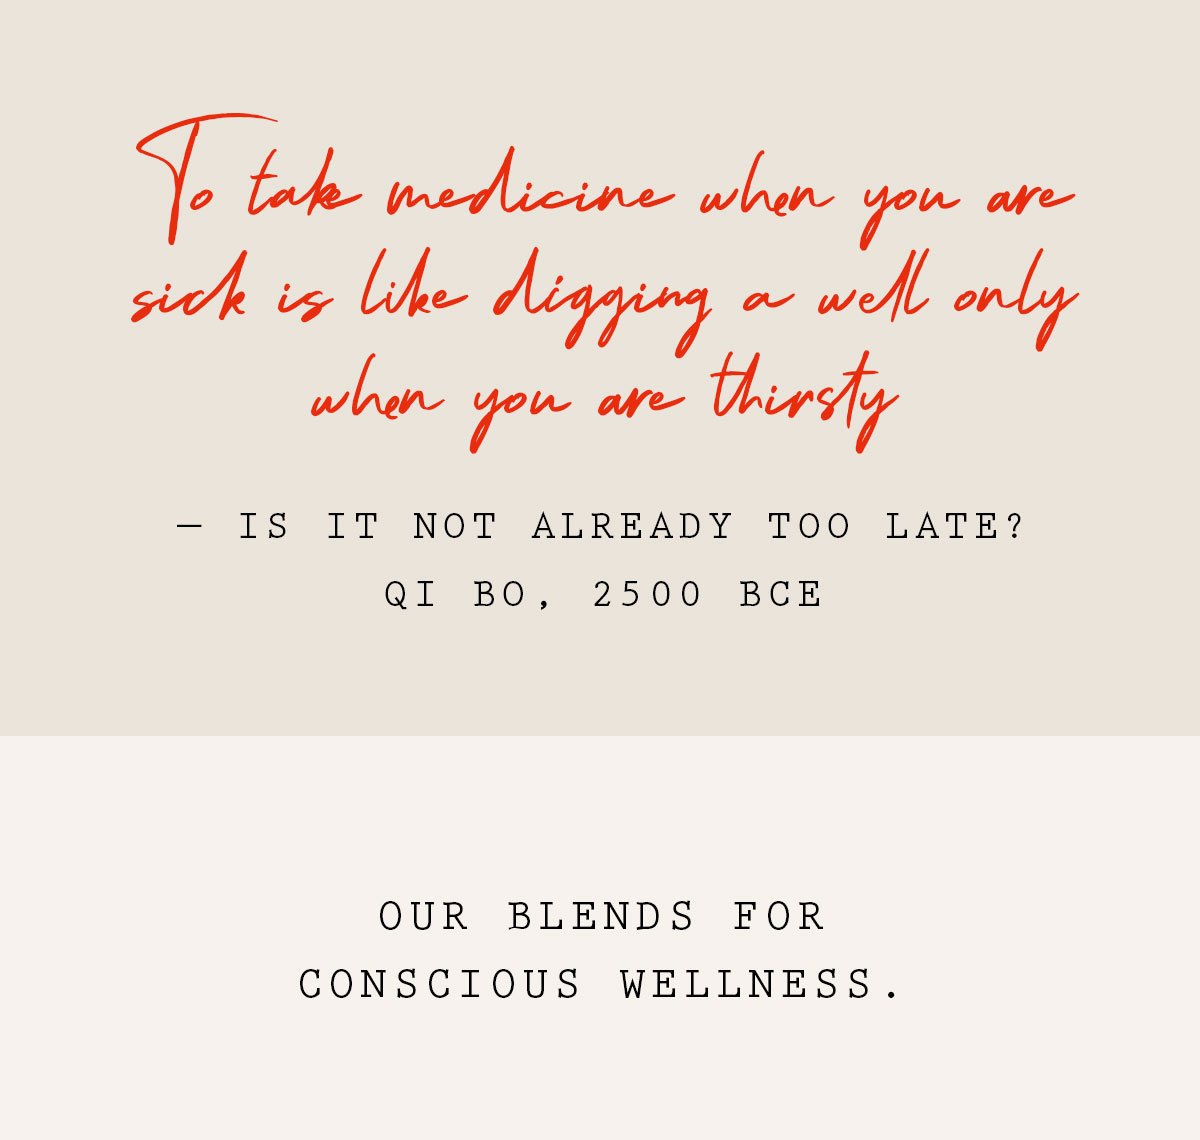 OUR BLENDS FOR CONSCIOUS WELLNESS.